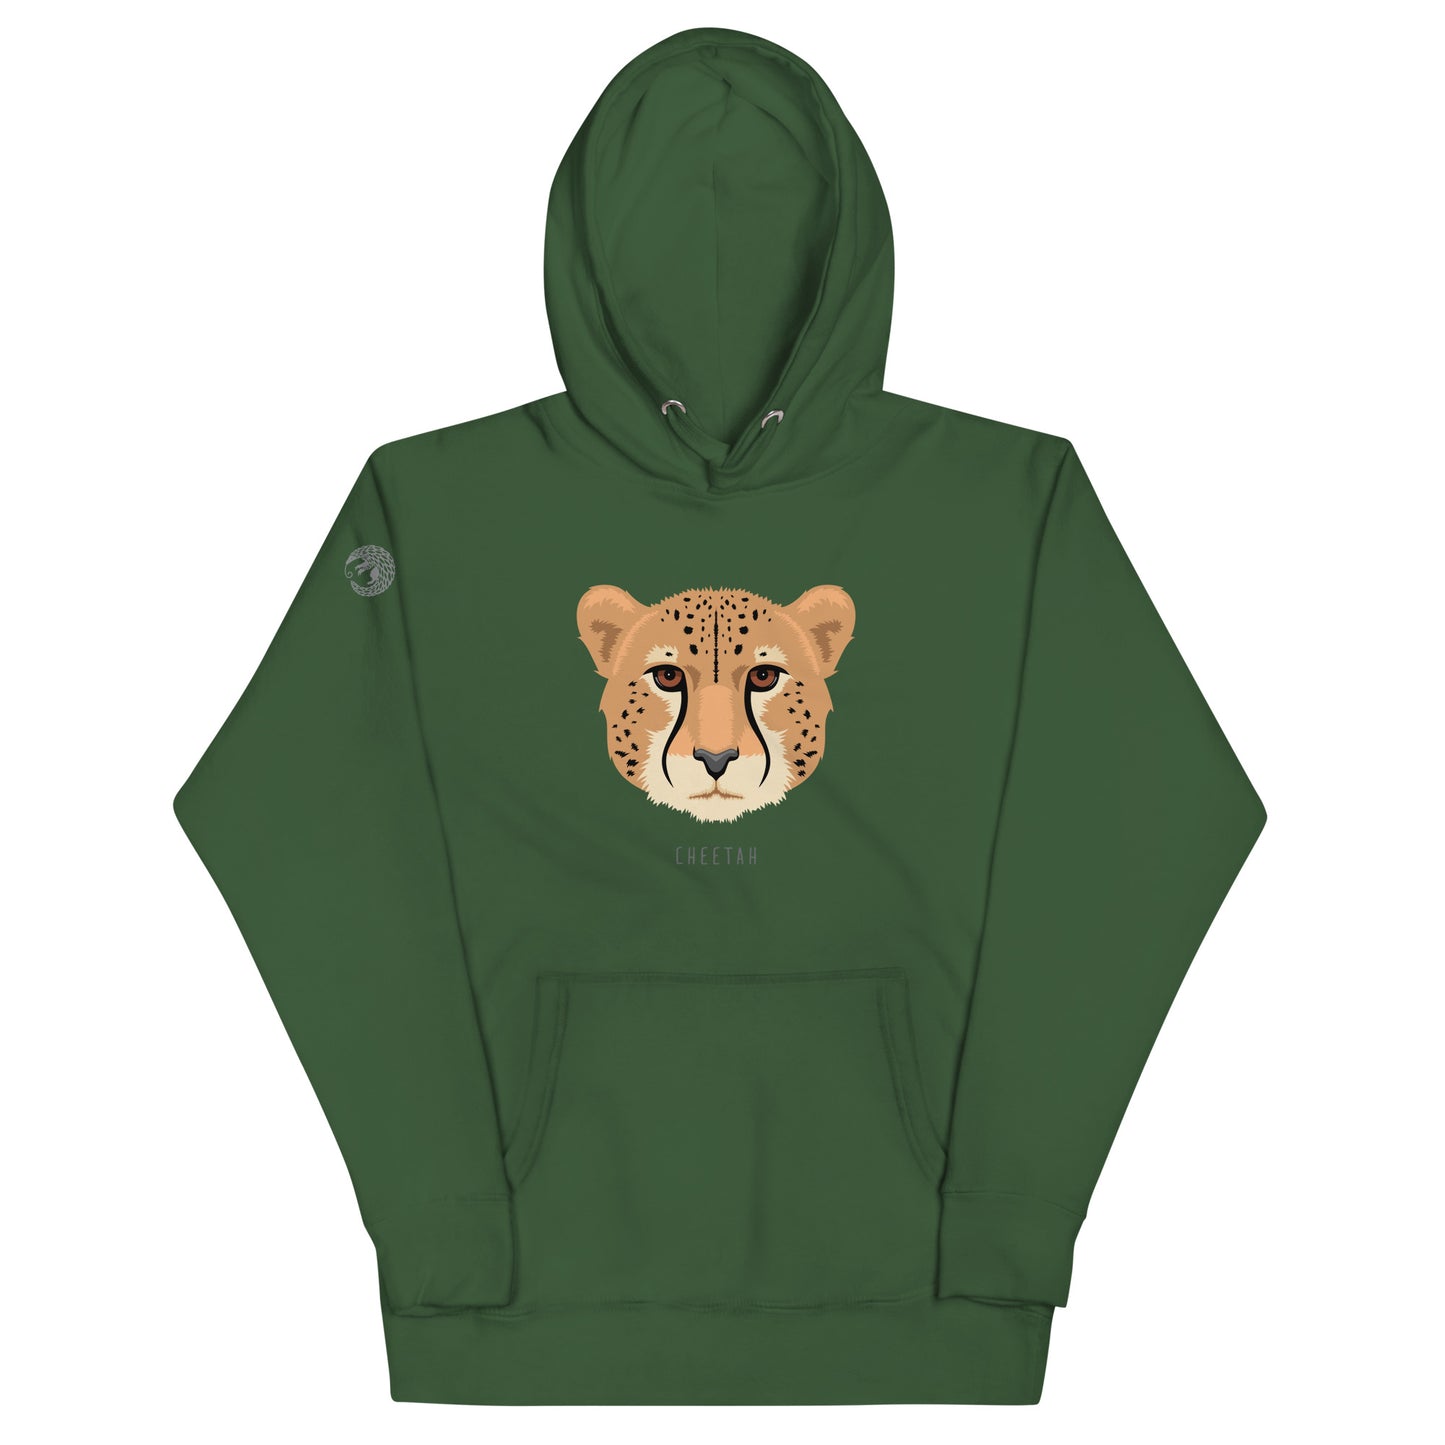 A green, hooded, pullover sweatshirt with an illustration of a cheetah's face and thew world "cheetah" beneath it. 